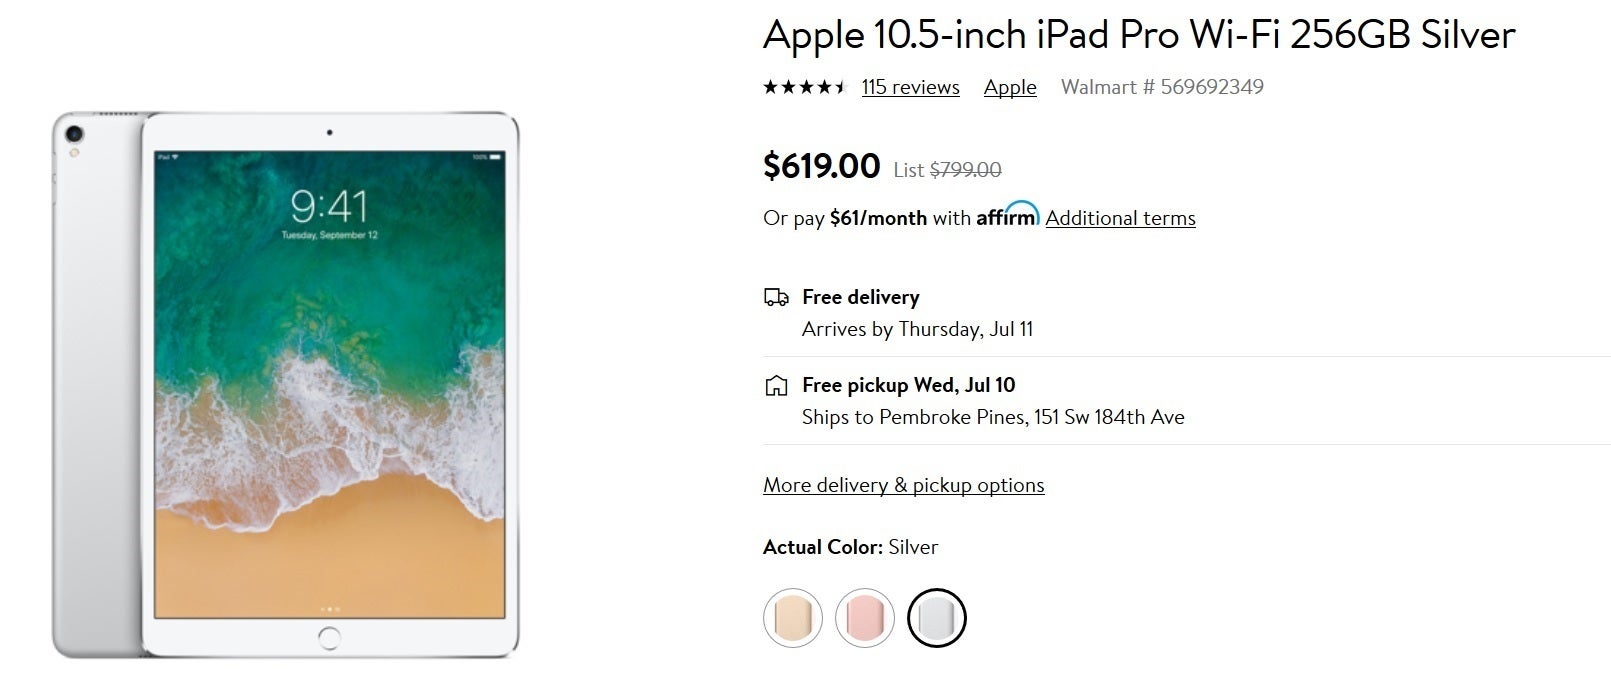 Save $180 on the 256GB 10.5-inch Apple iPad Pro from Walmart - Walmart deal takes $180 off the 10.5-inch Apple iPad Pro